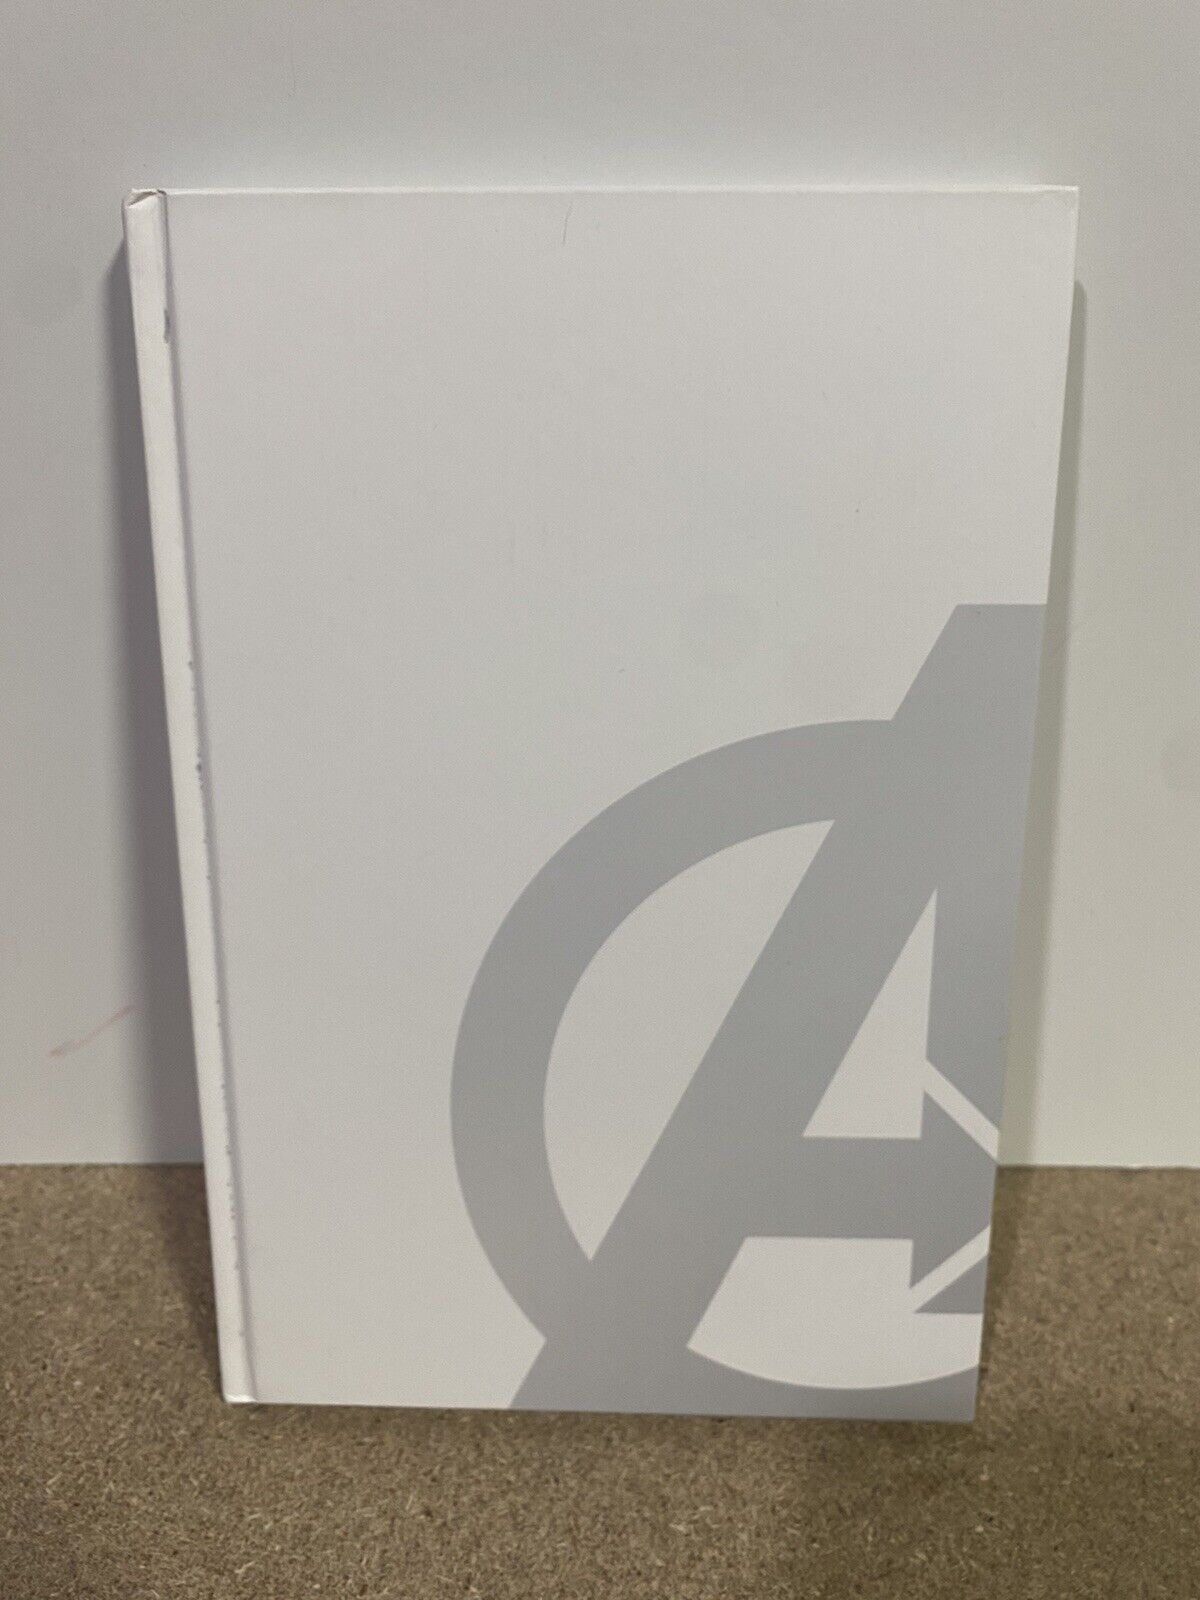 Avengers by Hickman Vol. 1 Hardcover No Dust Jacket Graphic Novel Comic